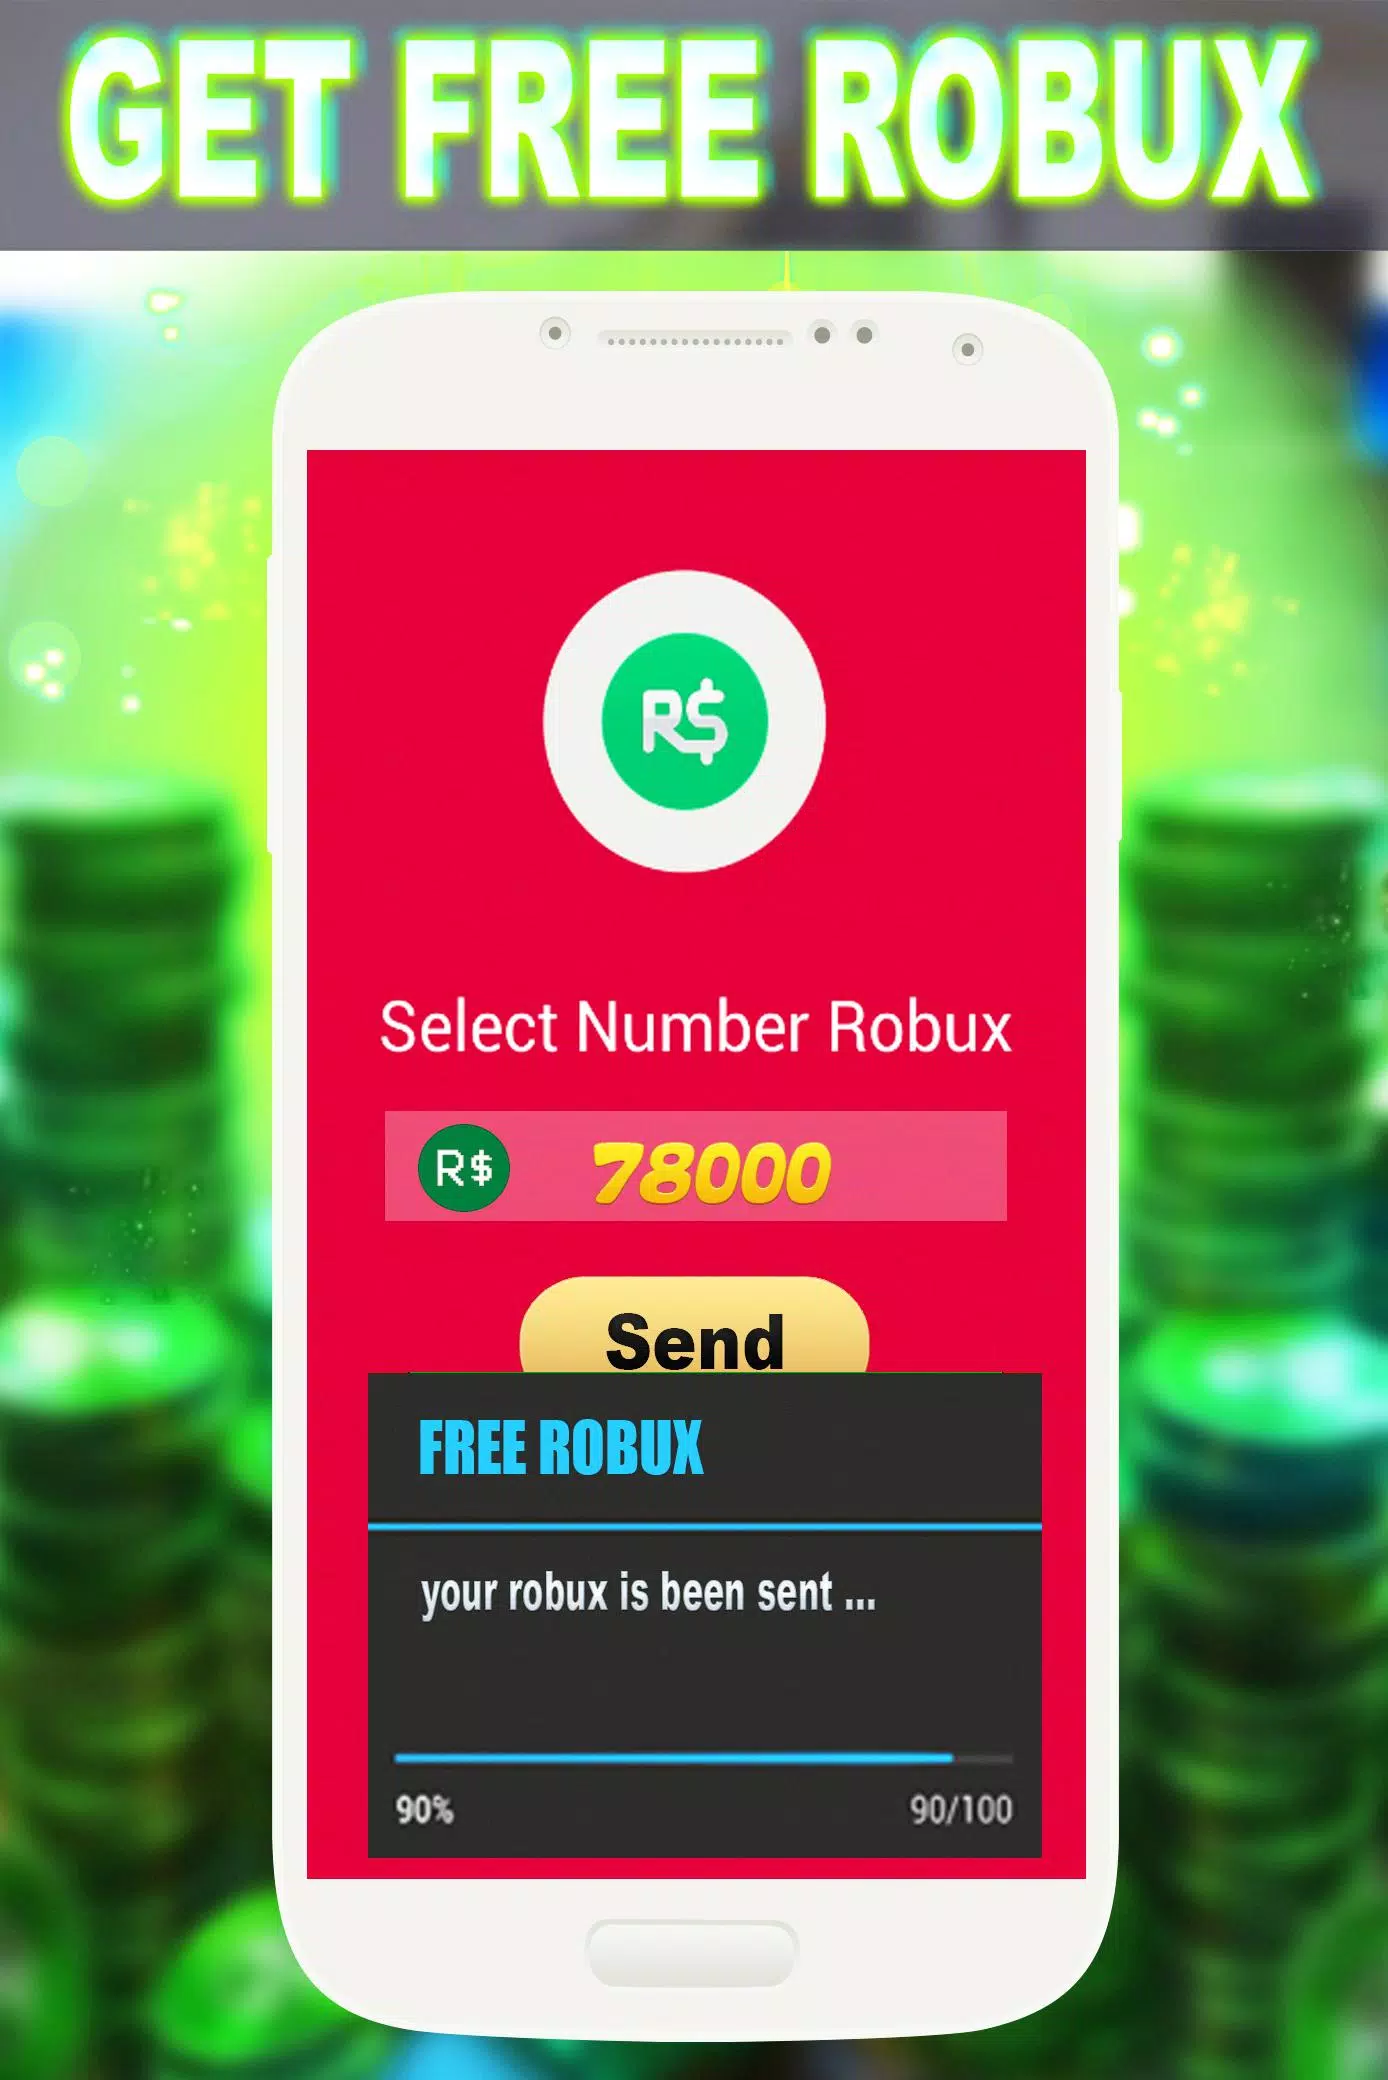 Robux Codes For Roblox for iOS (iPhone/iPad) - Free Download at AppPure